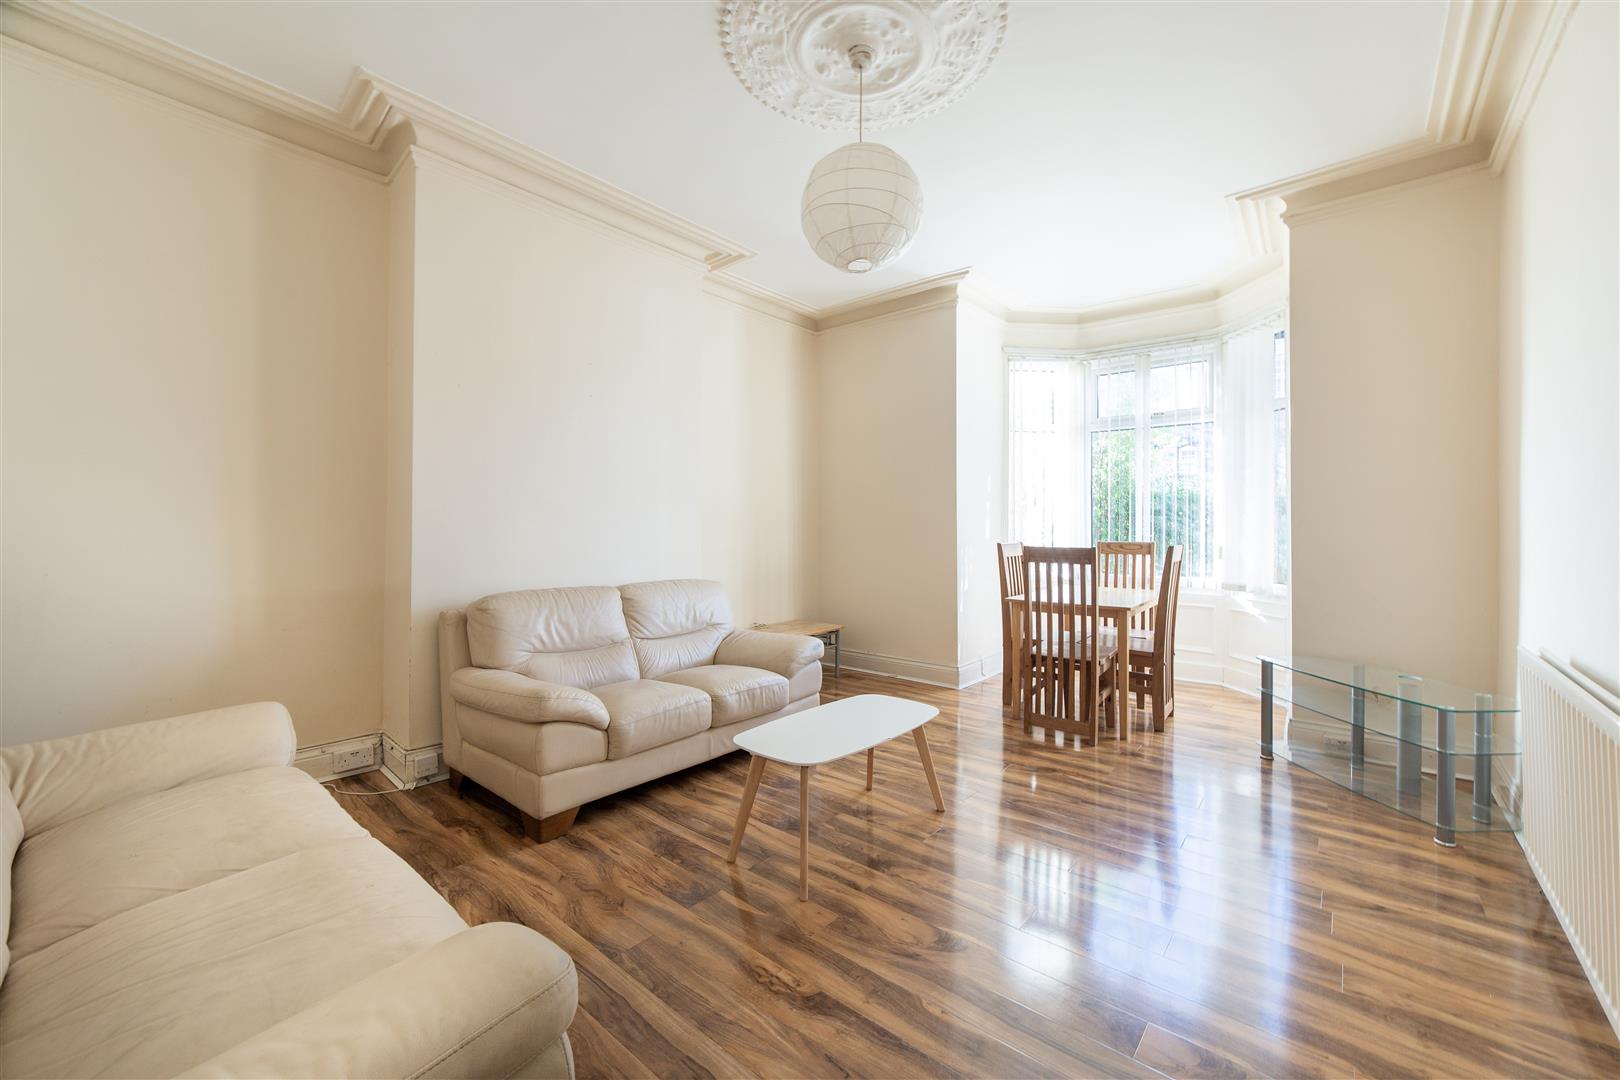 4 bed terraced house to rent in Chillingham Road, Heaton - Property Image 1